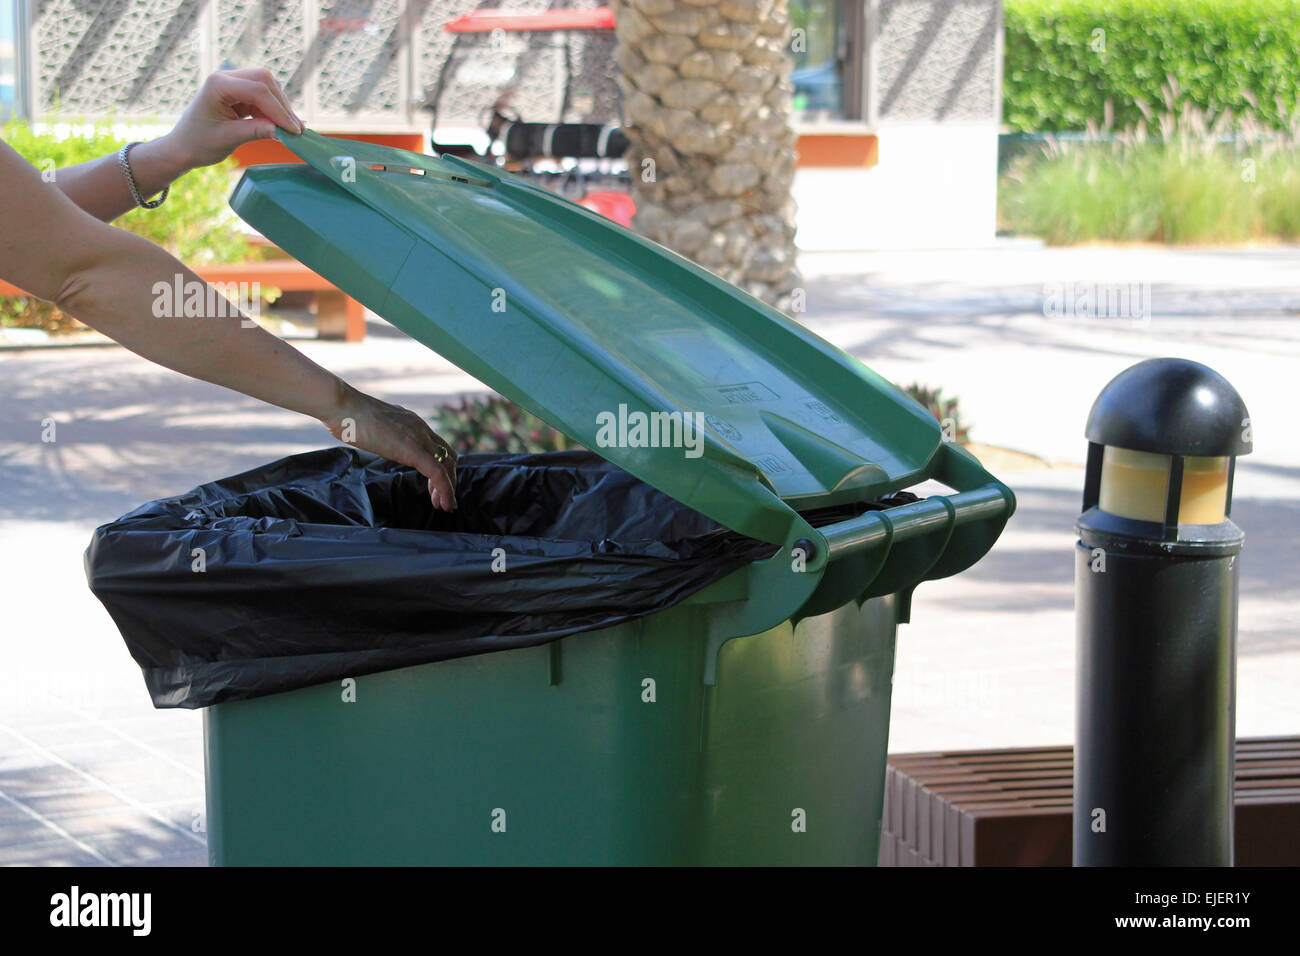 https://c8.alamy.com/comp/EJER1Y/a-woman-throwing-away-trash-in-a-large-green-rubbish-bin-in-a-park-EJER1Y.jpg